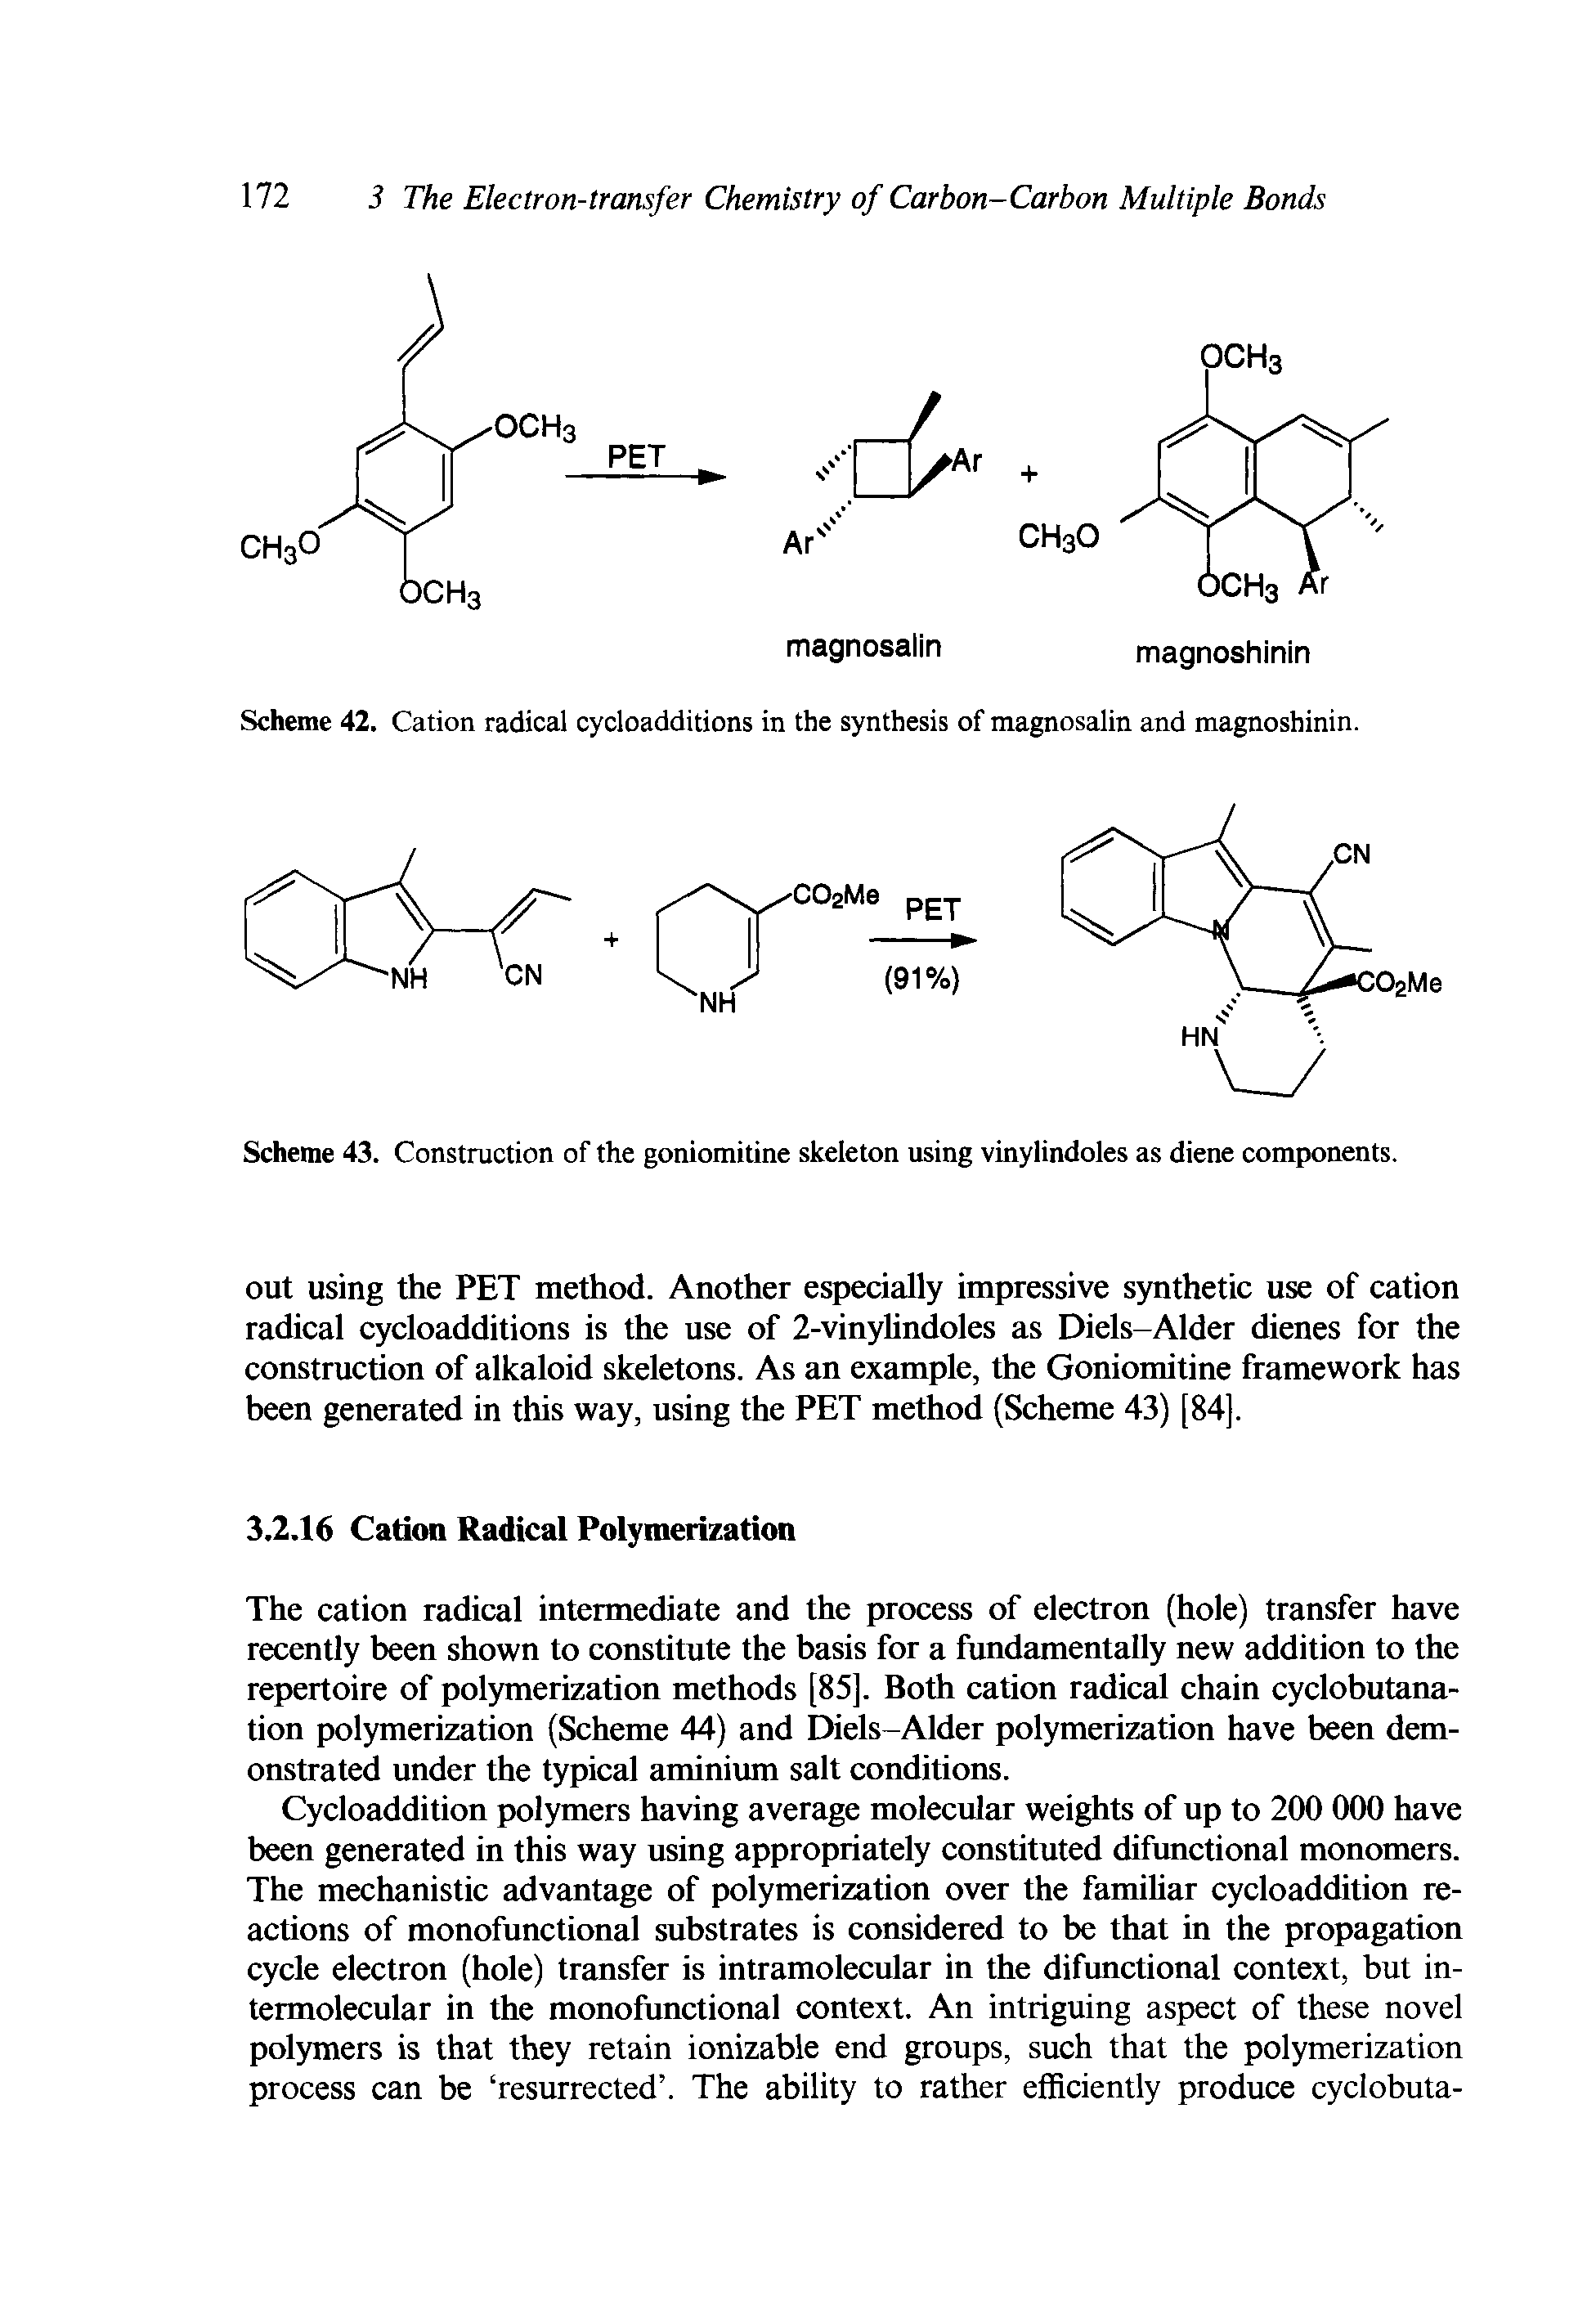 Scheme 42. Cation radical cycloadditions in the synthesis of magnosalin and magnoshinin.